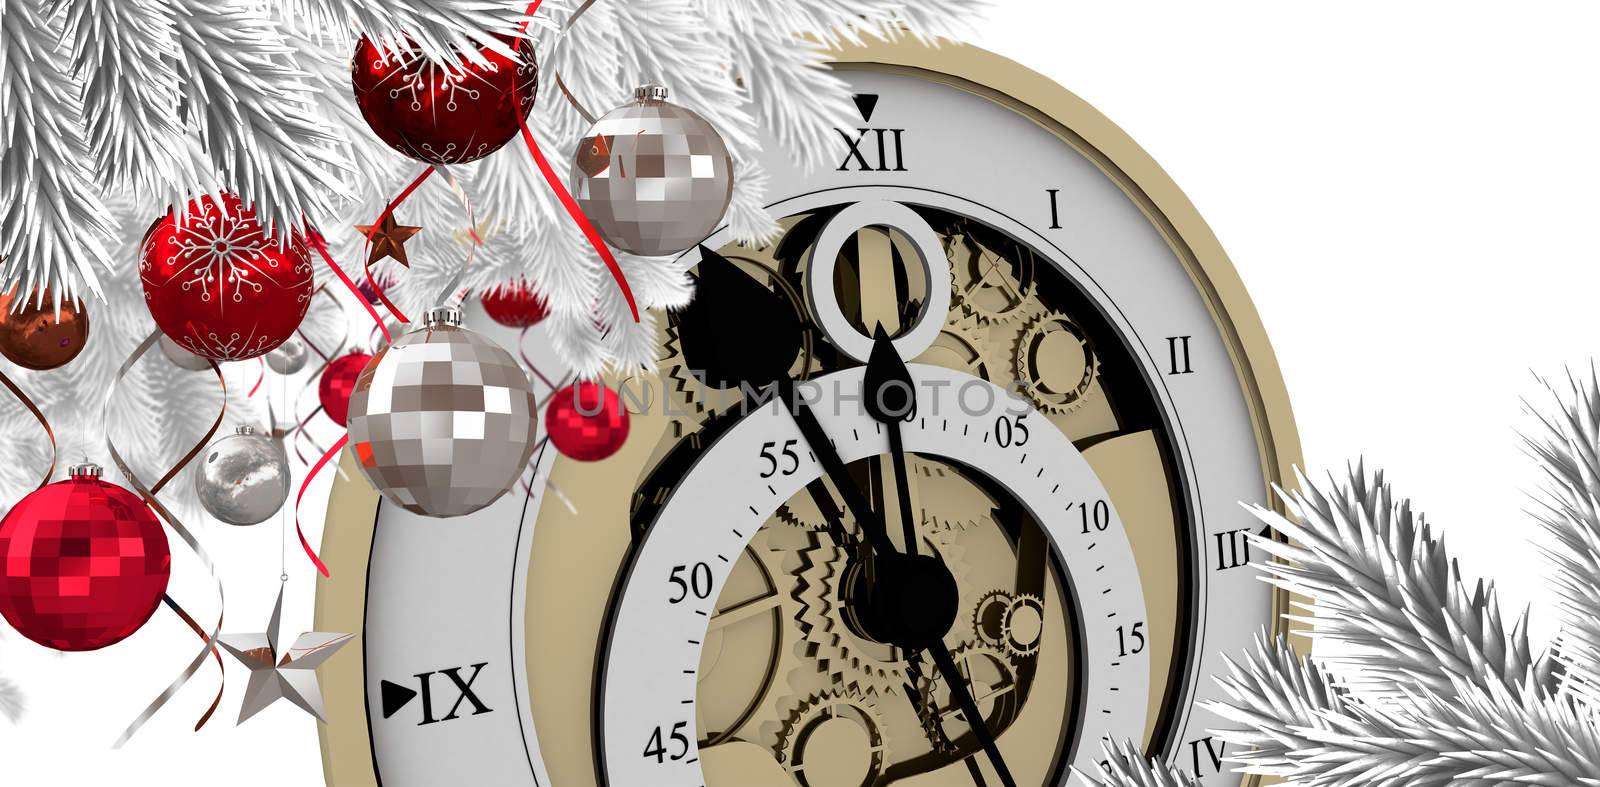 Christmas tree decorated with golden ornaments against  close-up of antique pocket clock with roman numbers Close-up of antique pocket clock with roman numbers against white vackground